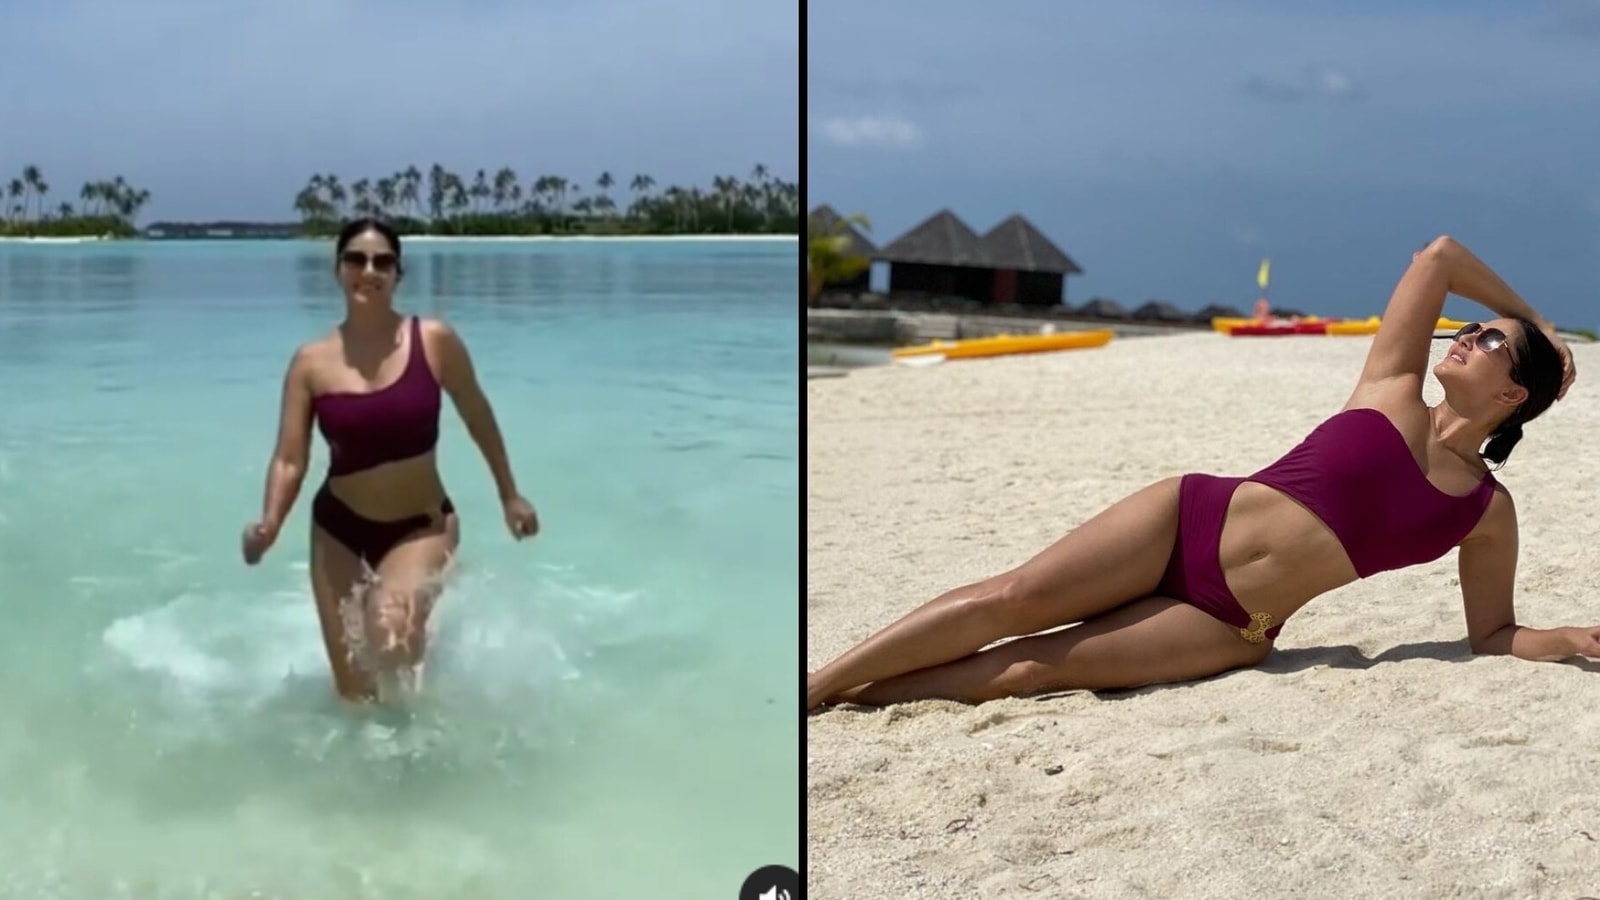 Saniliyon Saxe Video - Sunny Leone does slo-mo run as she emerges from water, blows kiss. Watch  video from Maldives holiday | Bollywood - Hindustan Times